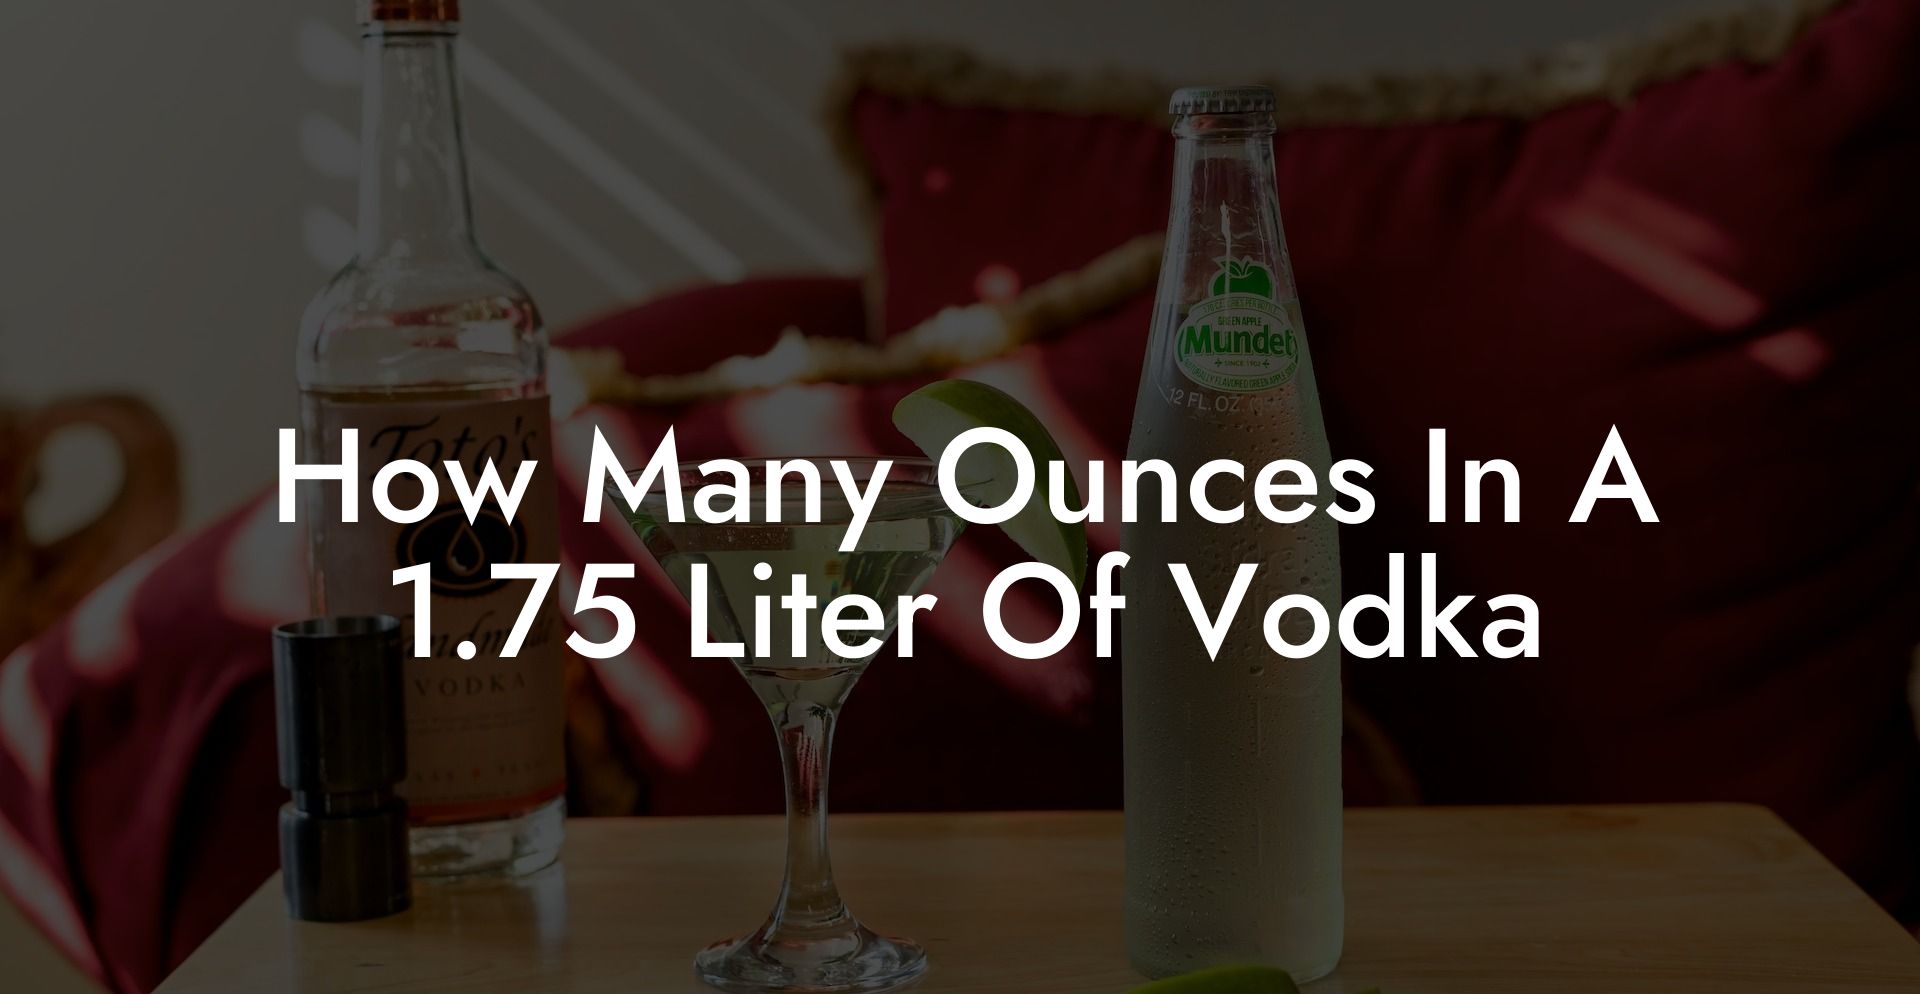 How Many Ounces In A 1.75 Liter Of Vodka